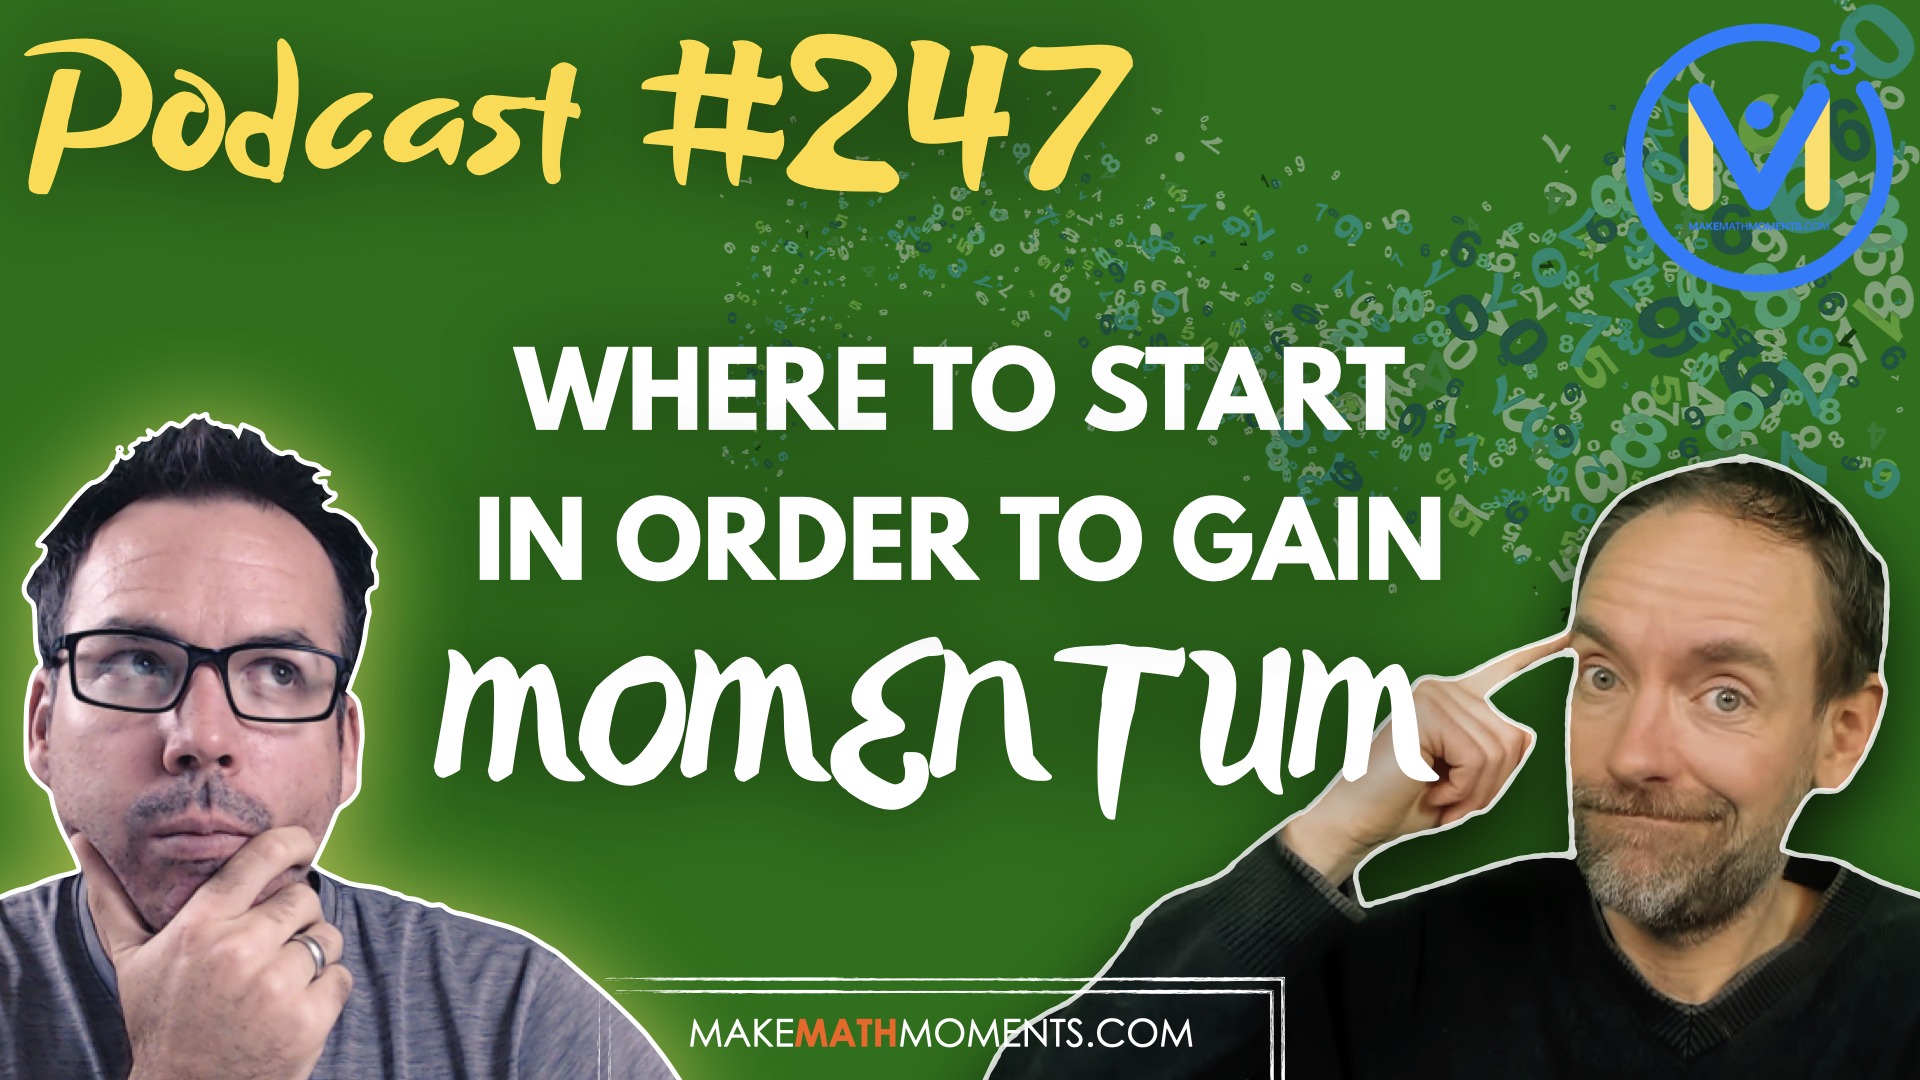 Episode #247: Where to Start In Order to Gain Momentum? – A Math Mentoring Moment